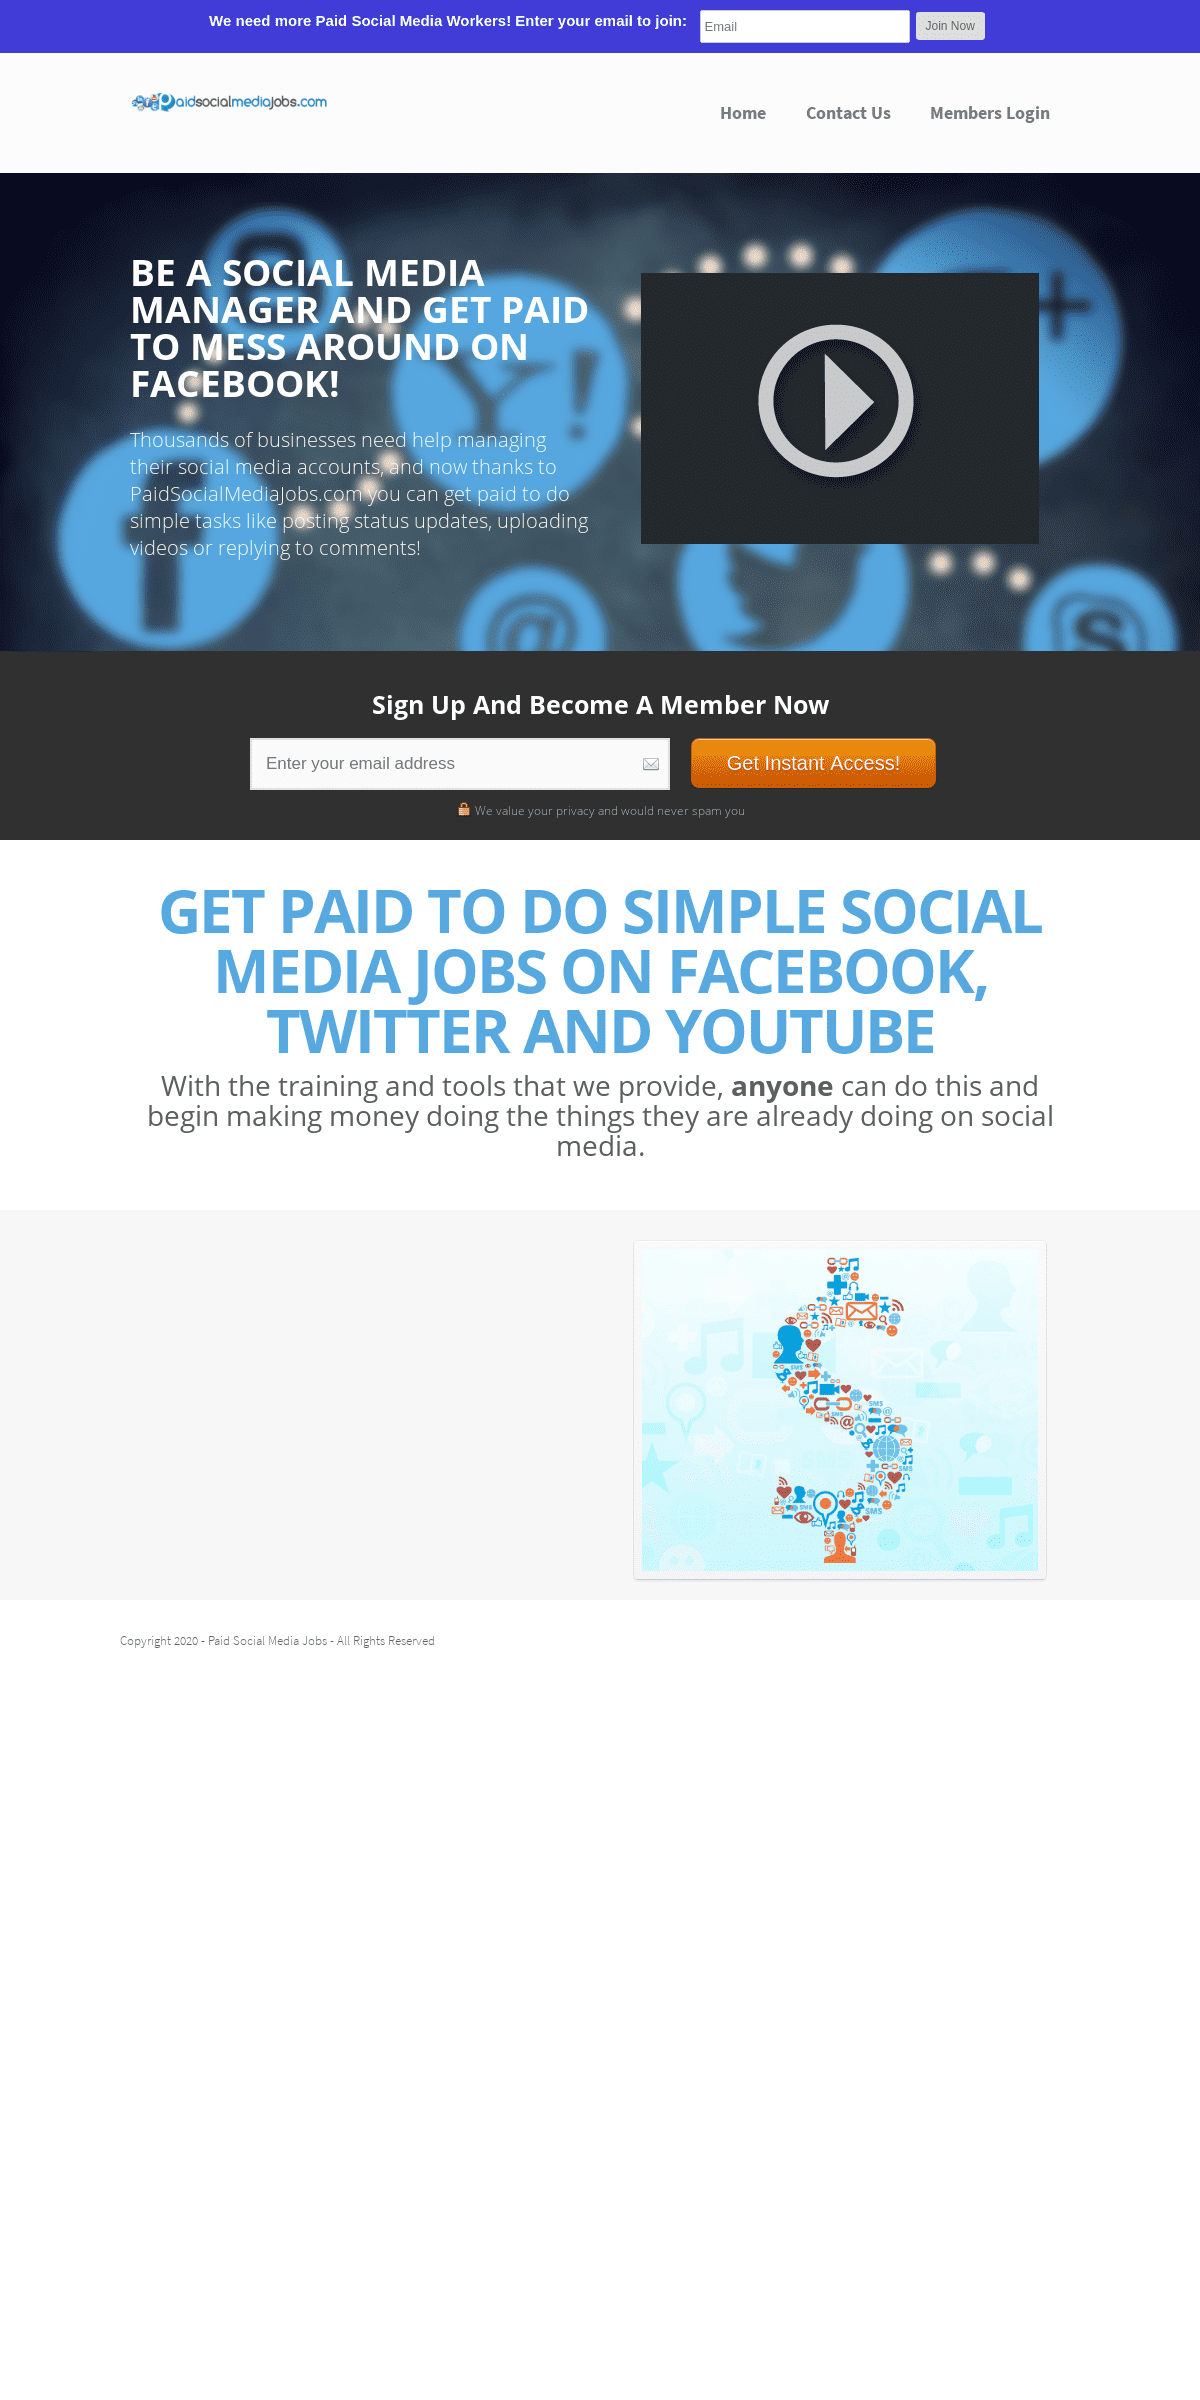 A complete backup of paidsocialmediajobs.com